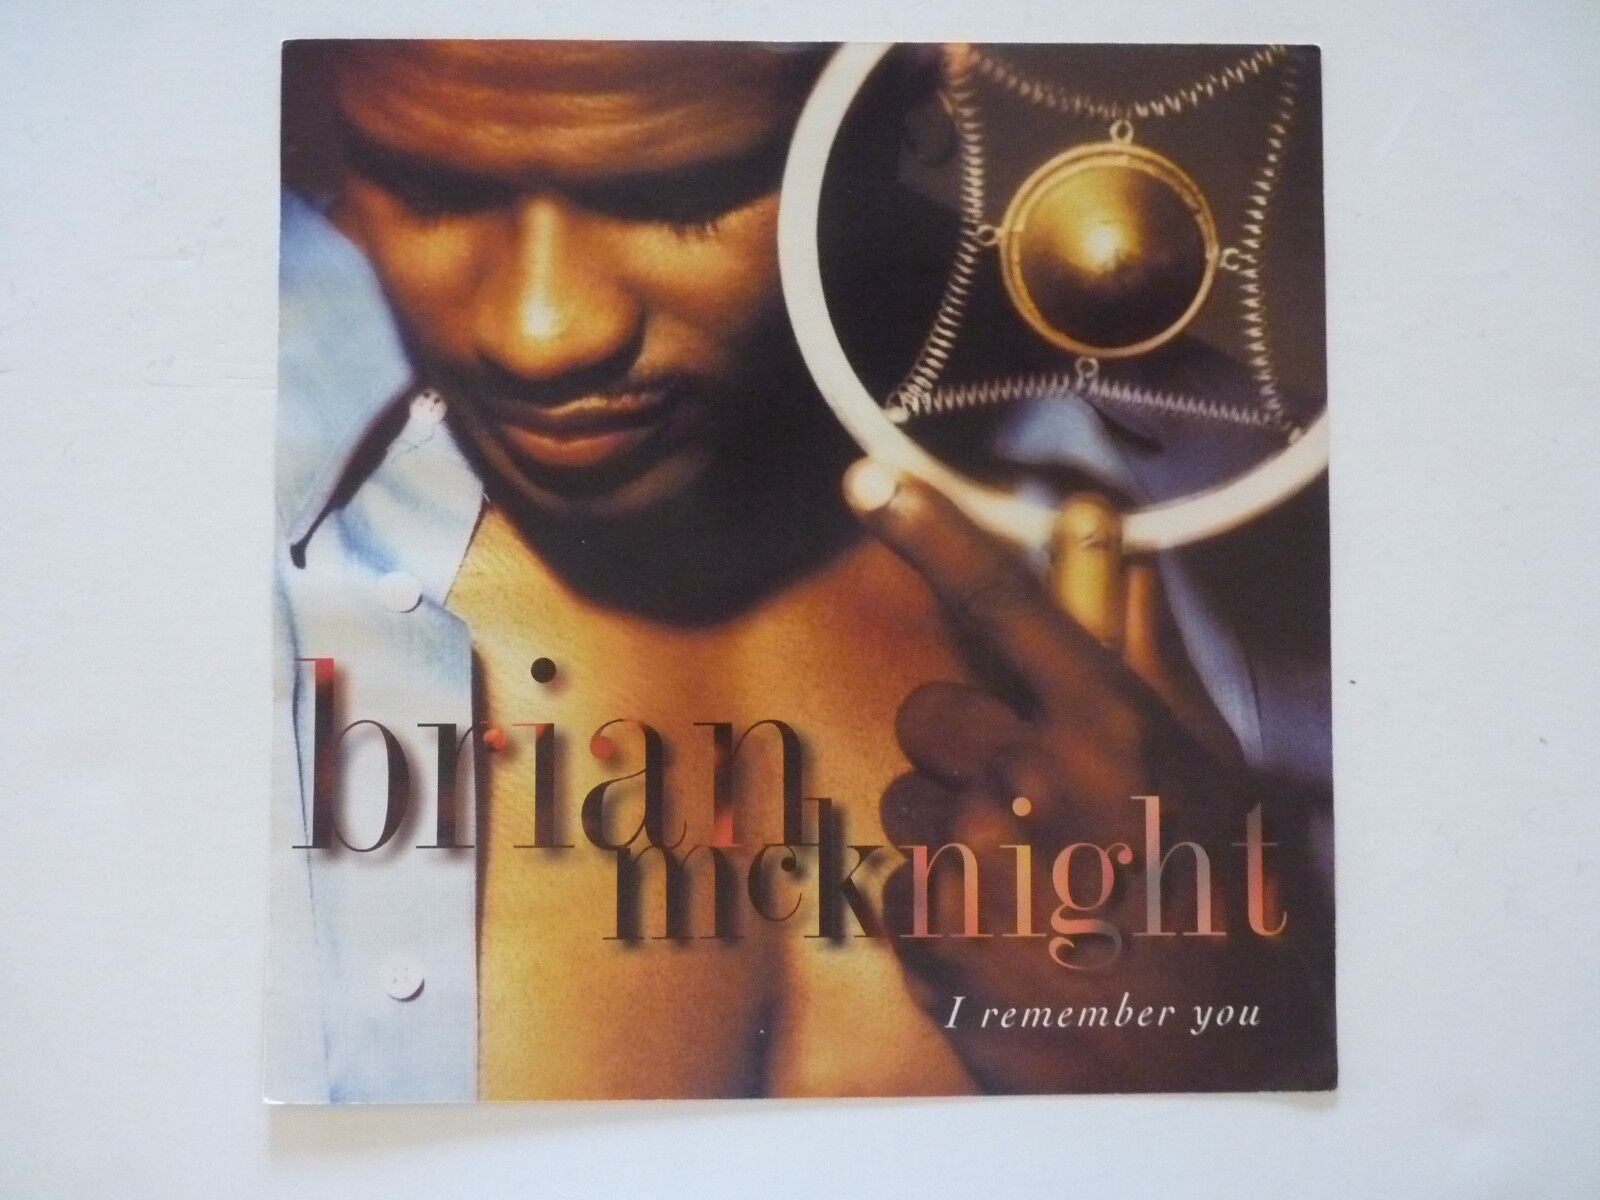 Brian McKnight I Remember You LP Record Photo Poster painting Flat 12x12 Poster